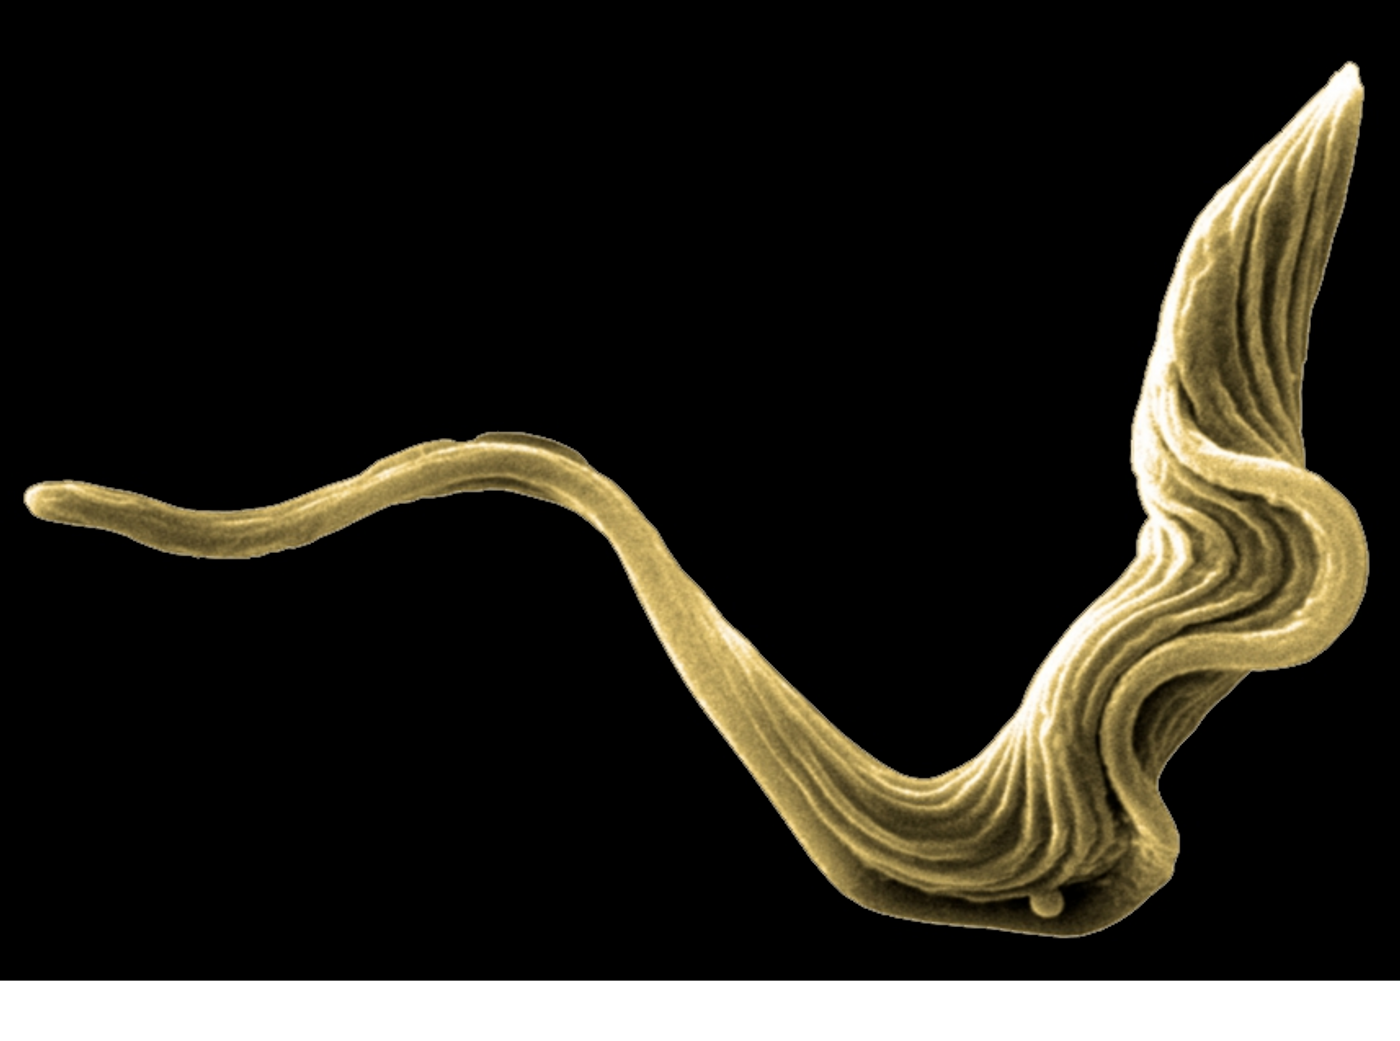 Trypanosoma brucei is a complex of protozoan parasites that cause a disease known as African sleeping sickness. 